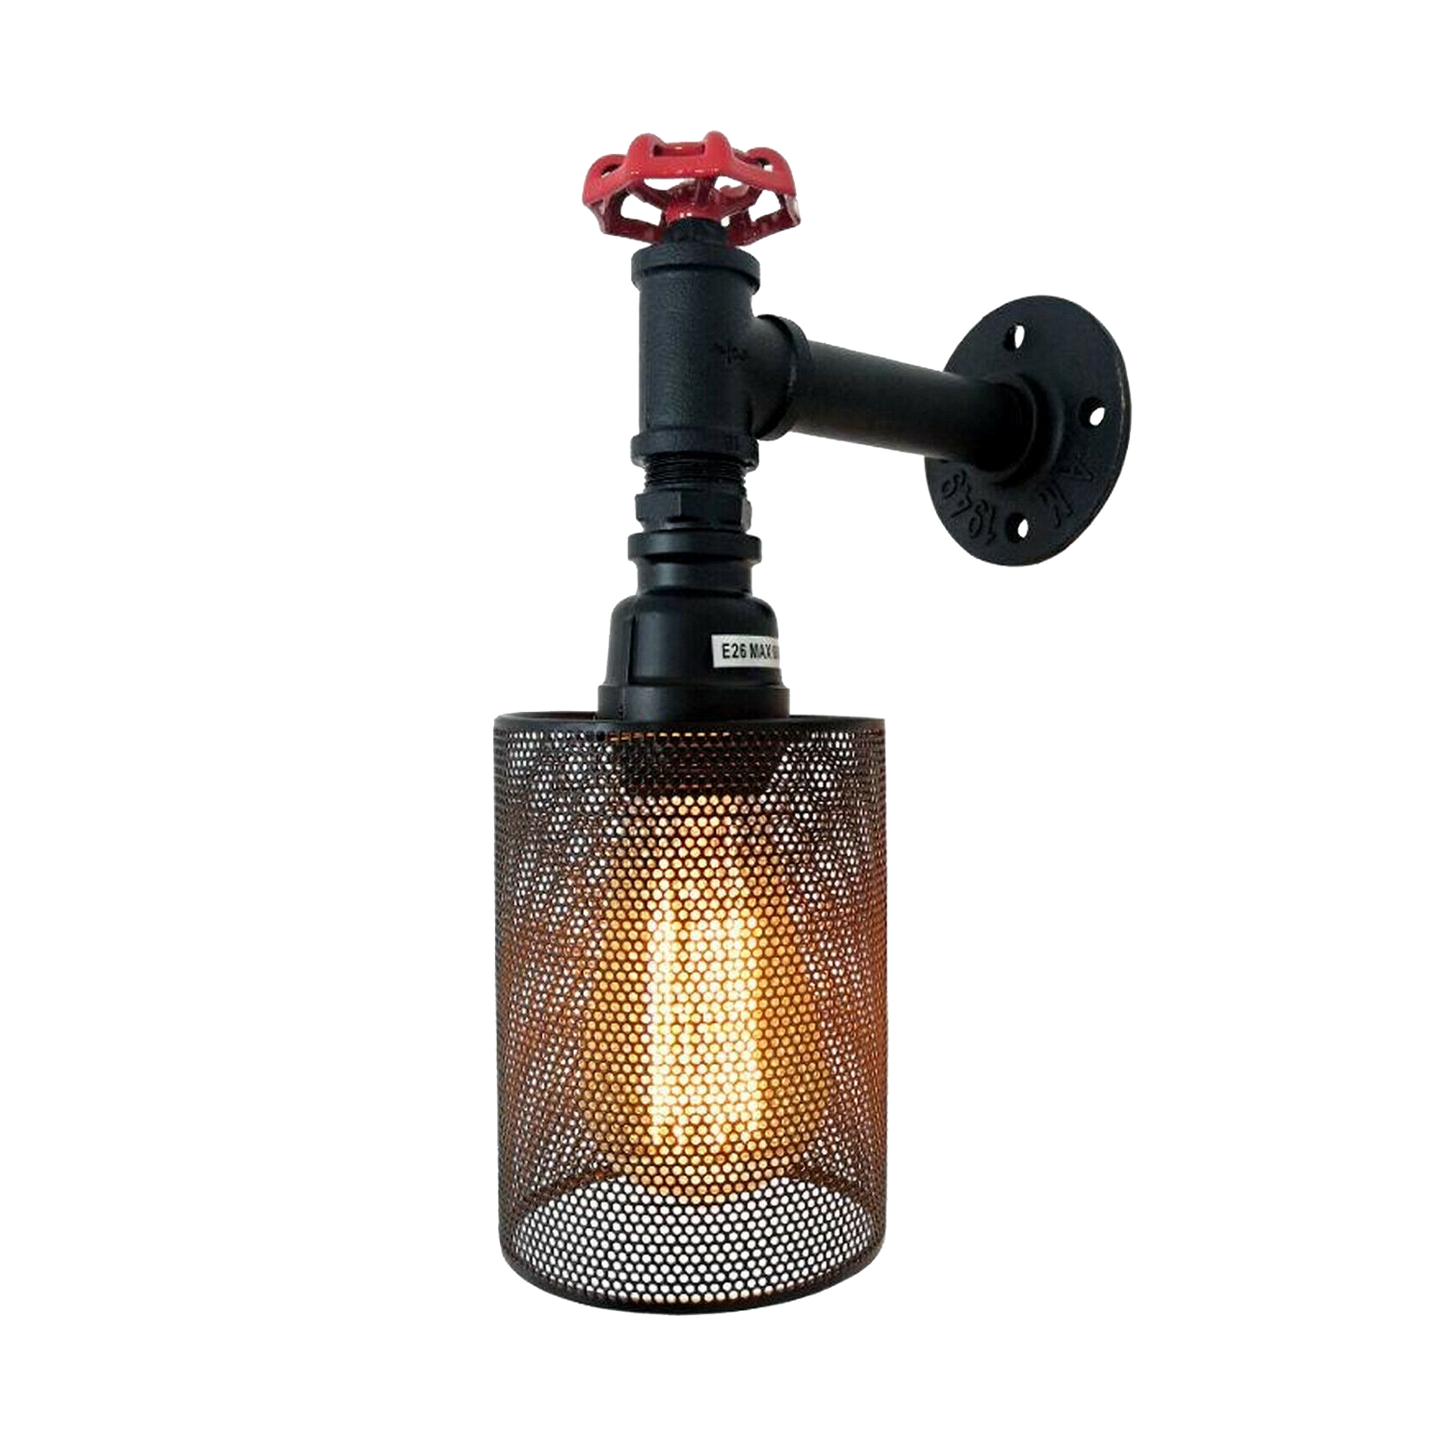 Industrial Modern Retro Rustic Sconce Wall Light Lamp Fitting Fixture Pipe lighting~2316